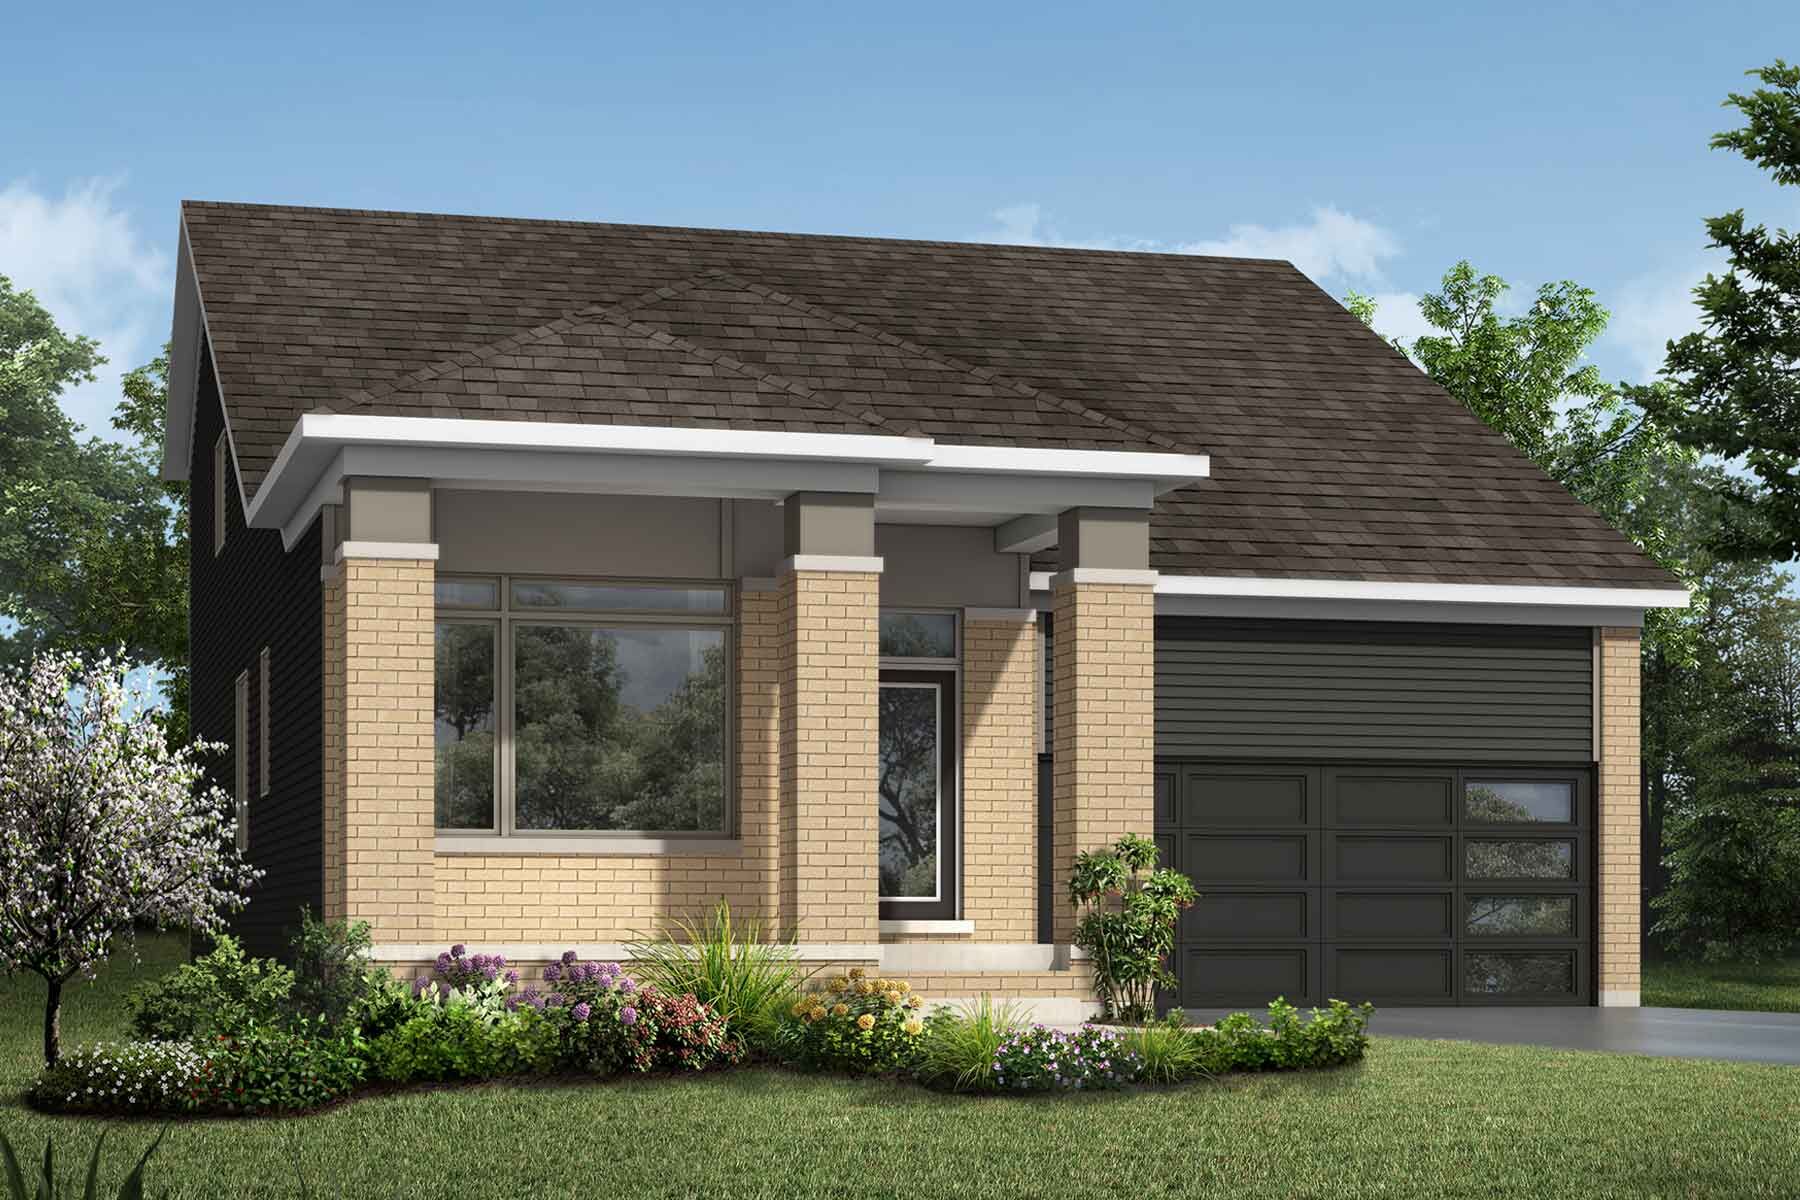 A Transitional style detached home with a double car garage.